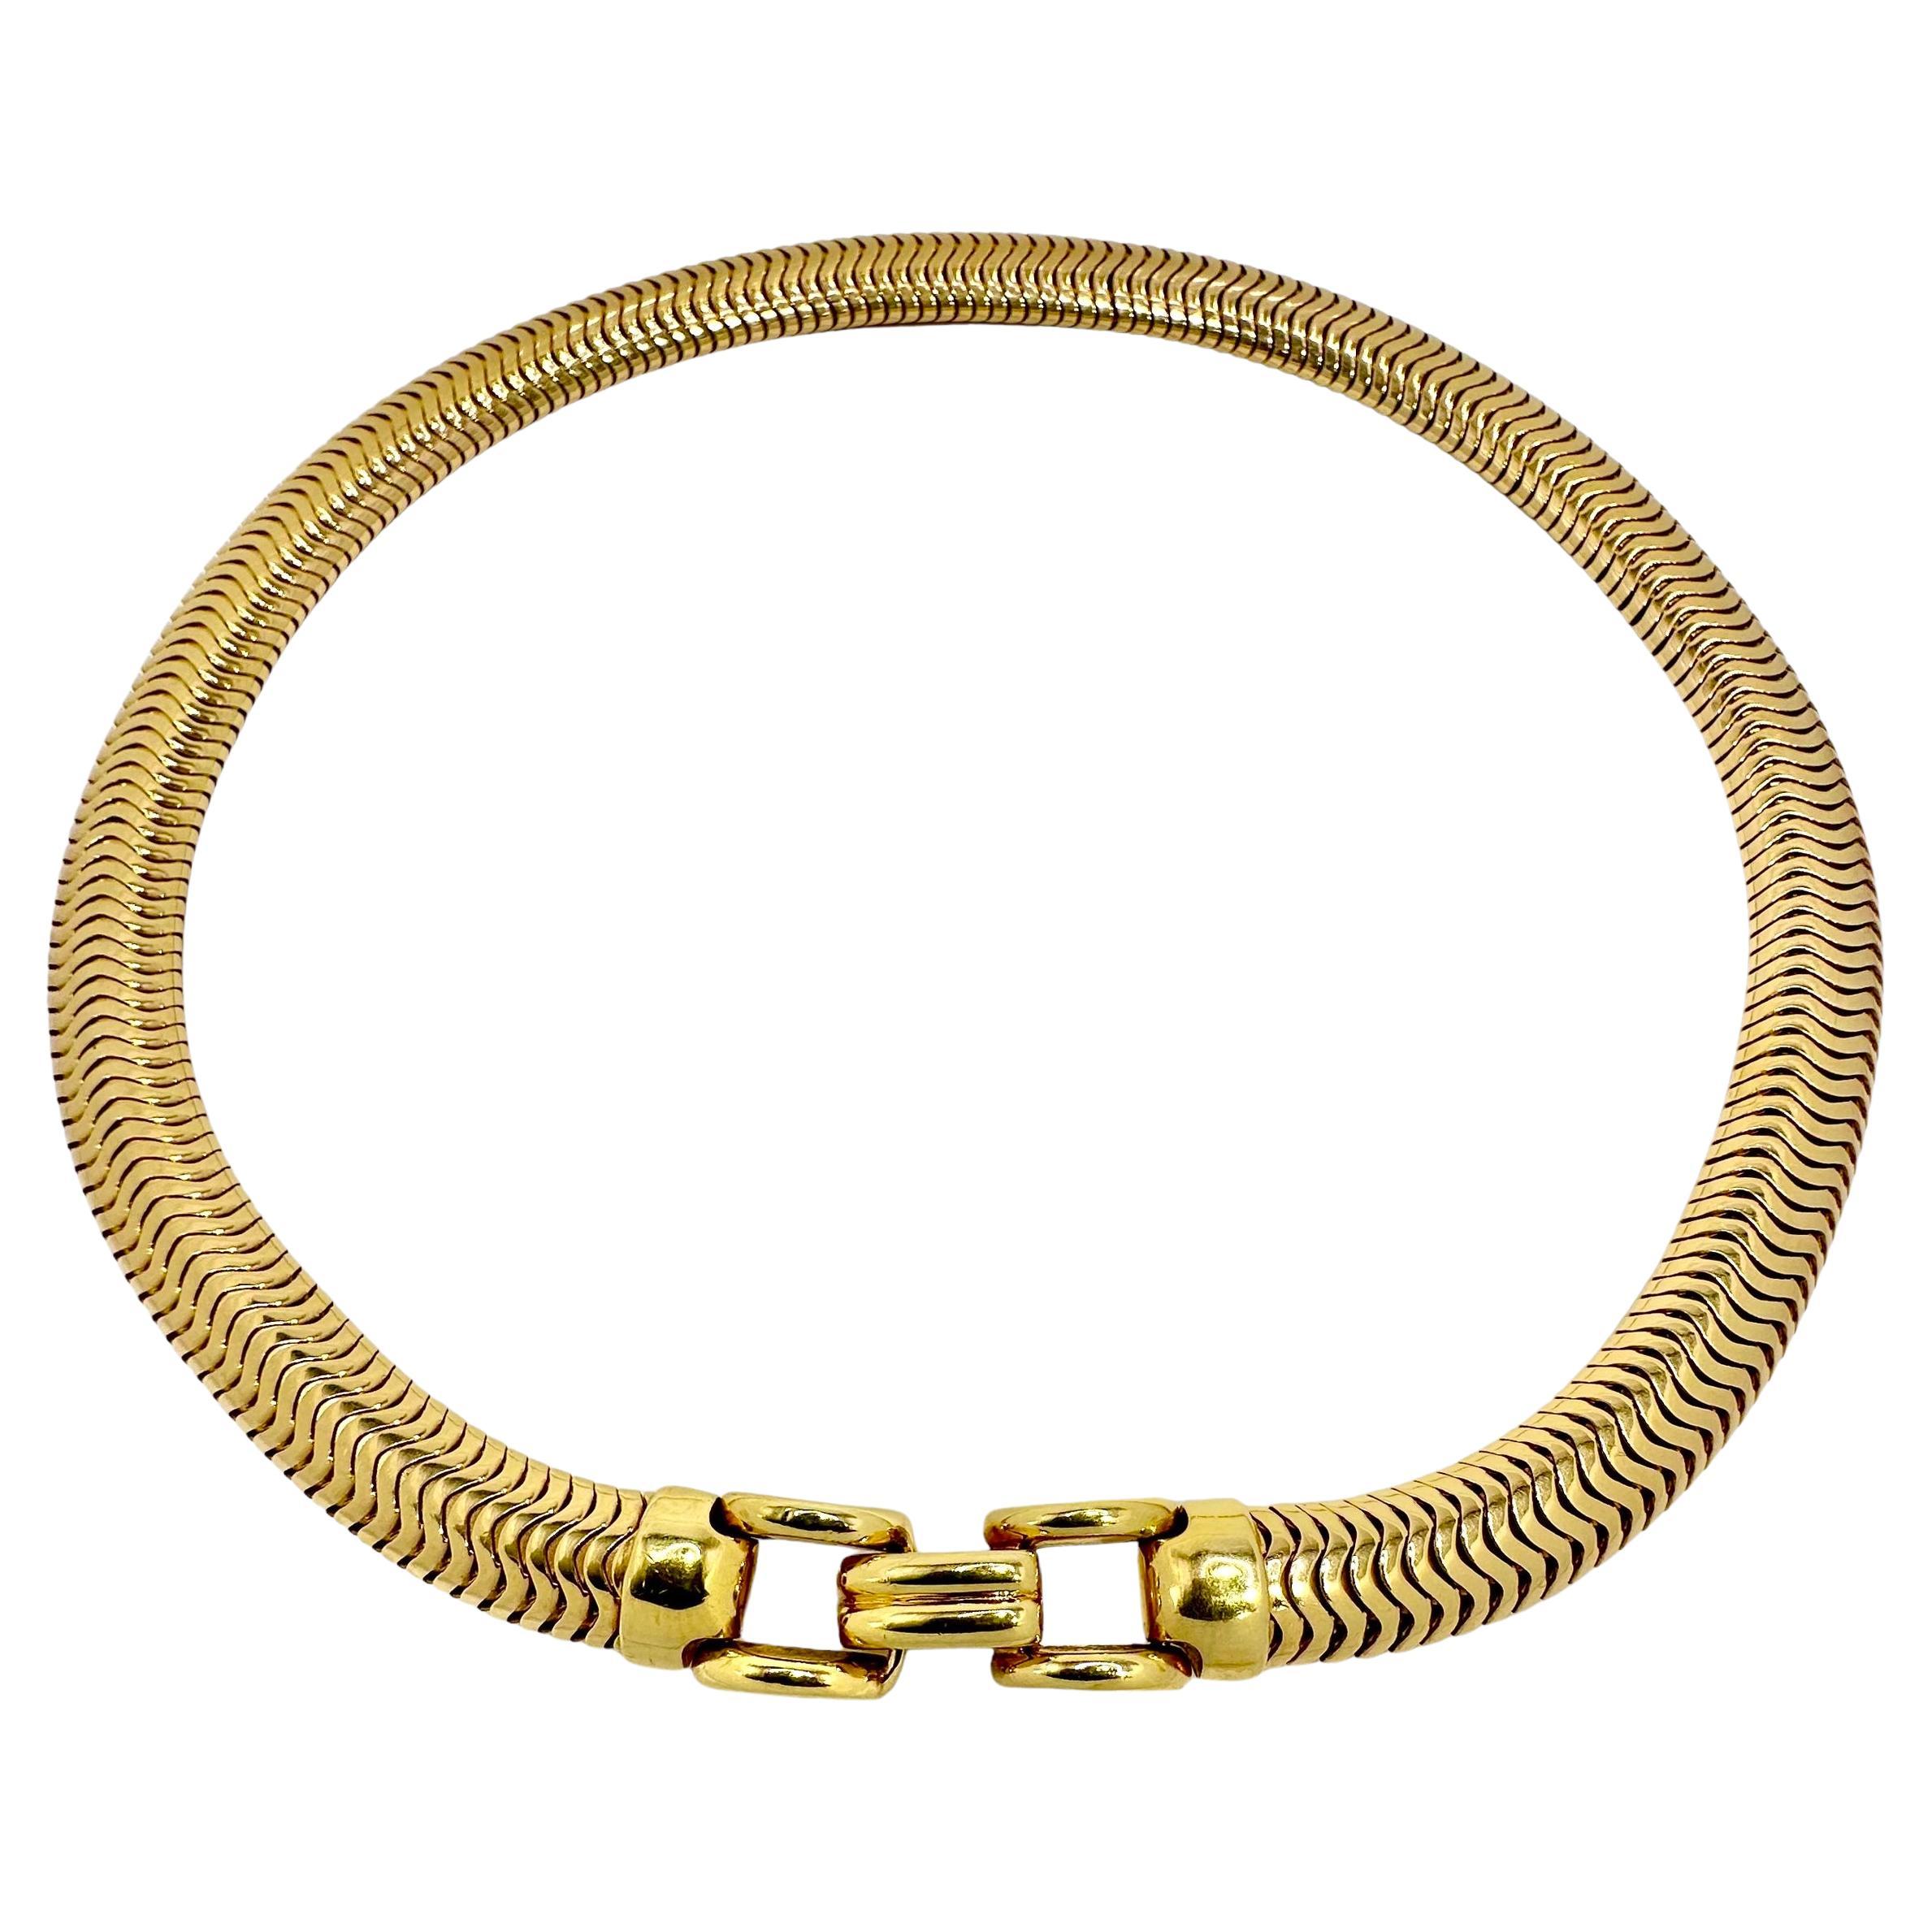 Retro Period Cartier Snake Link Choker Necklace in 14k Yellow Gold For Sale